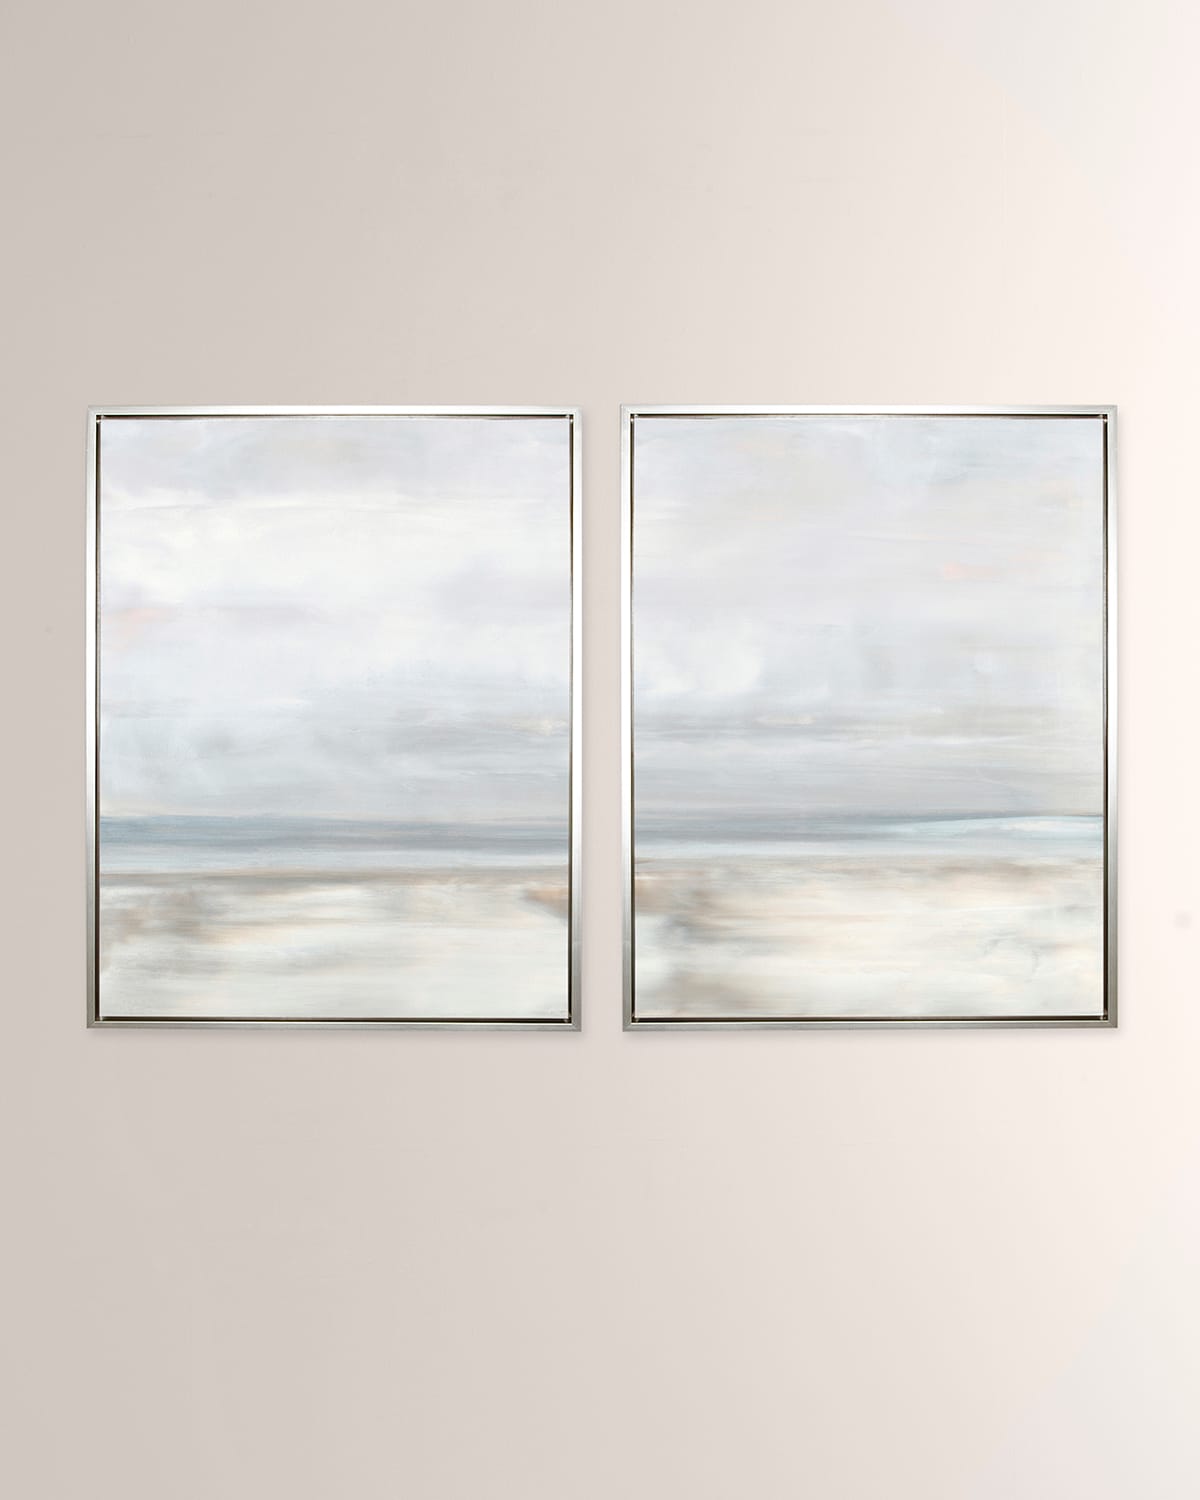 Shop Benson-cobb Studios Simpatico Vertical Canvas Diptych Giclees In Sterling Floater Frames, Set Of 2 In Blue-gray, White